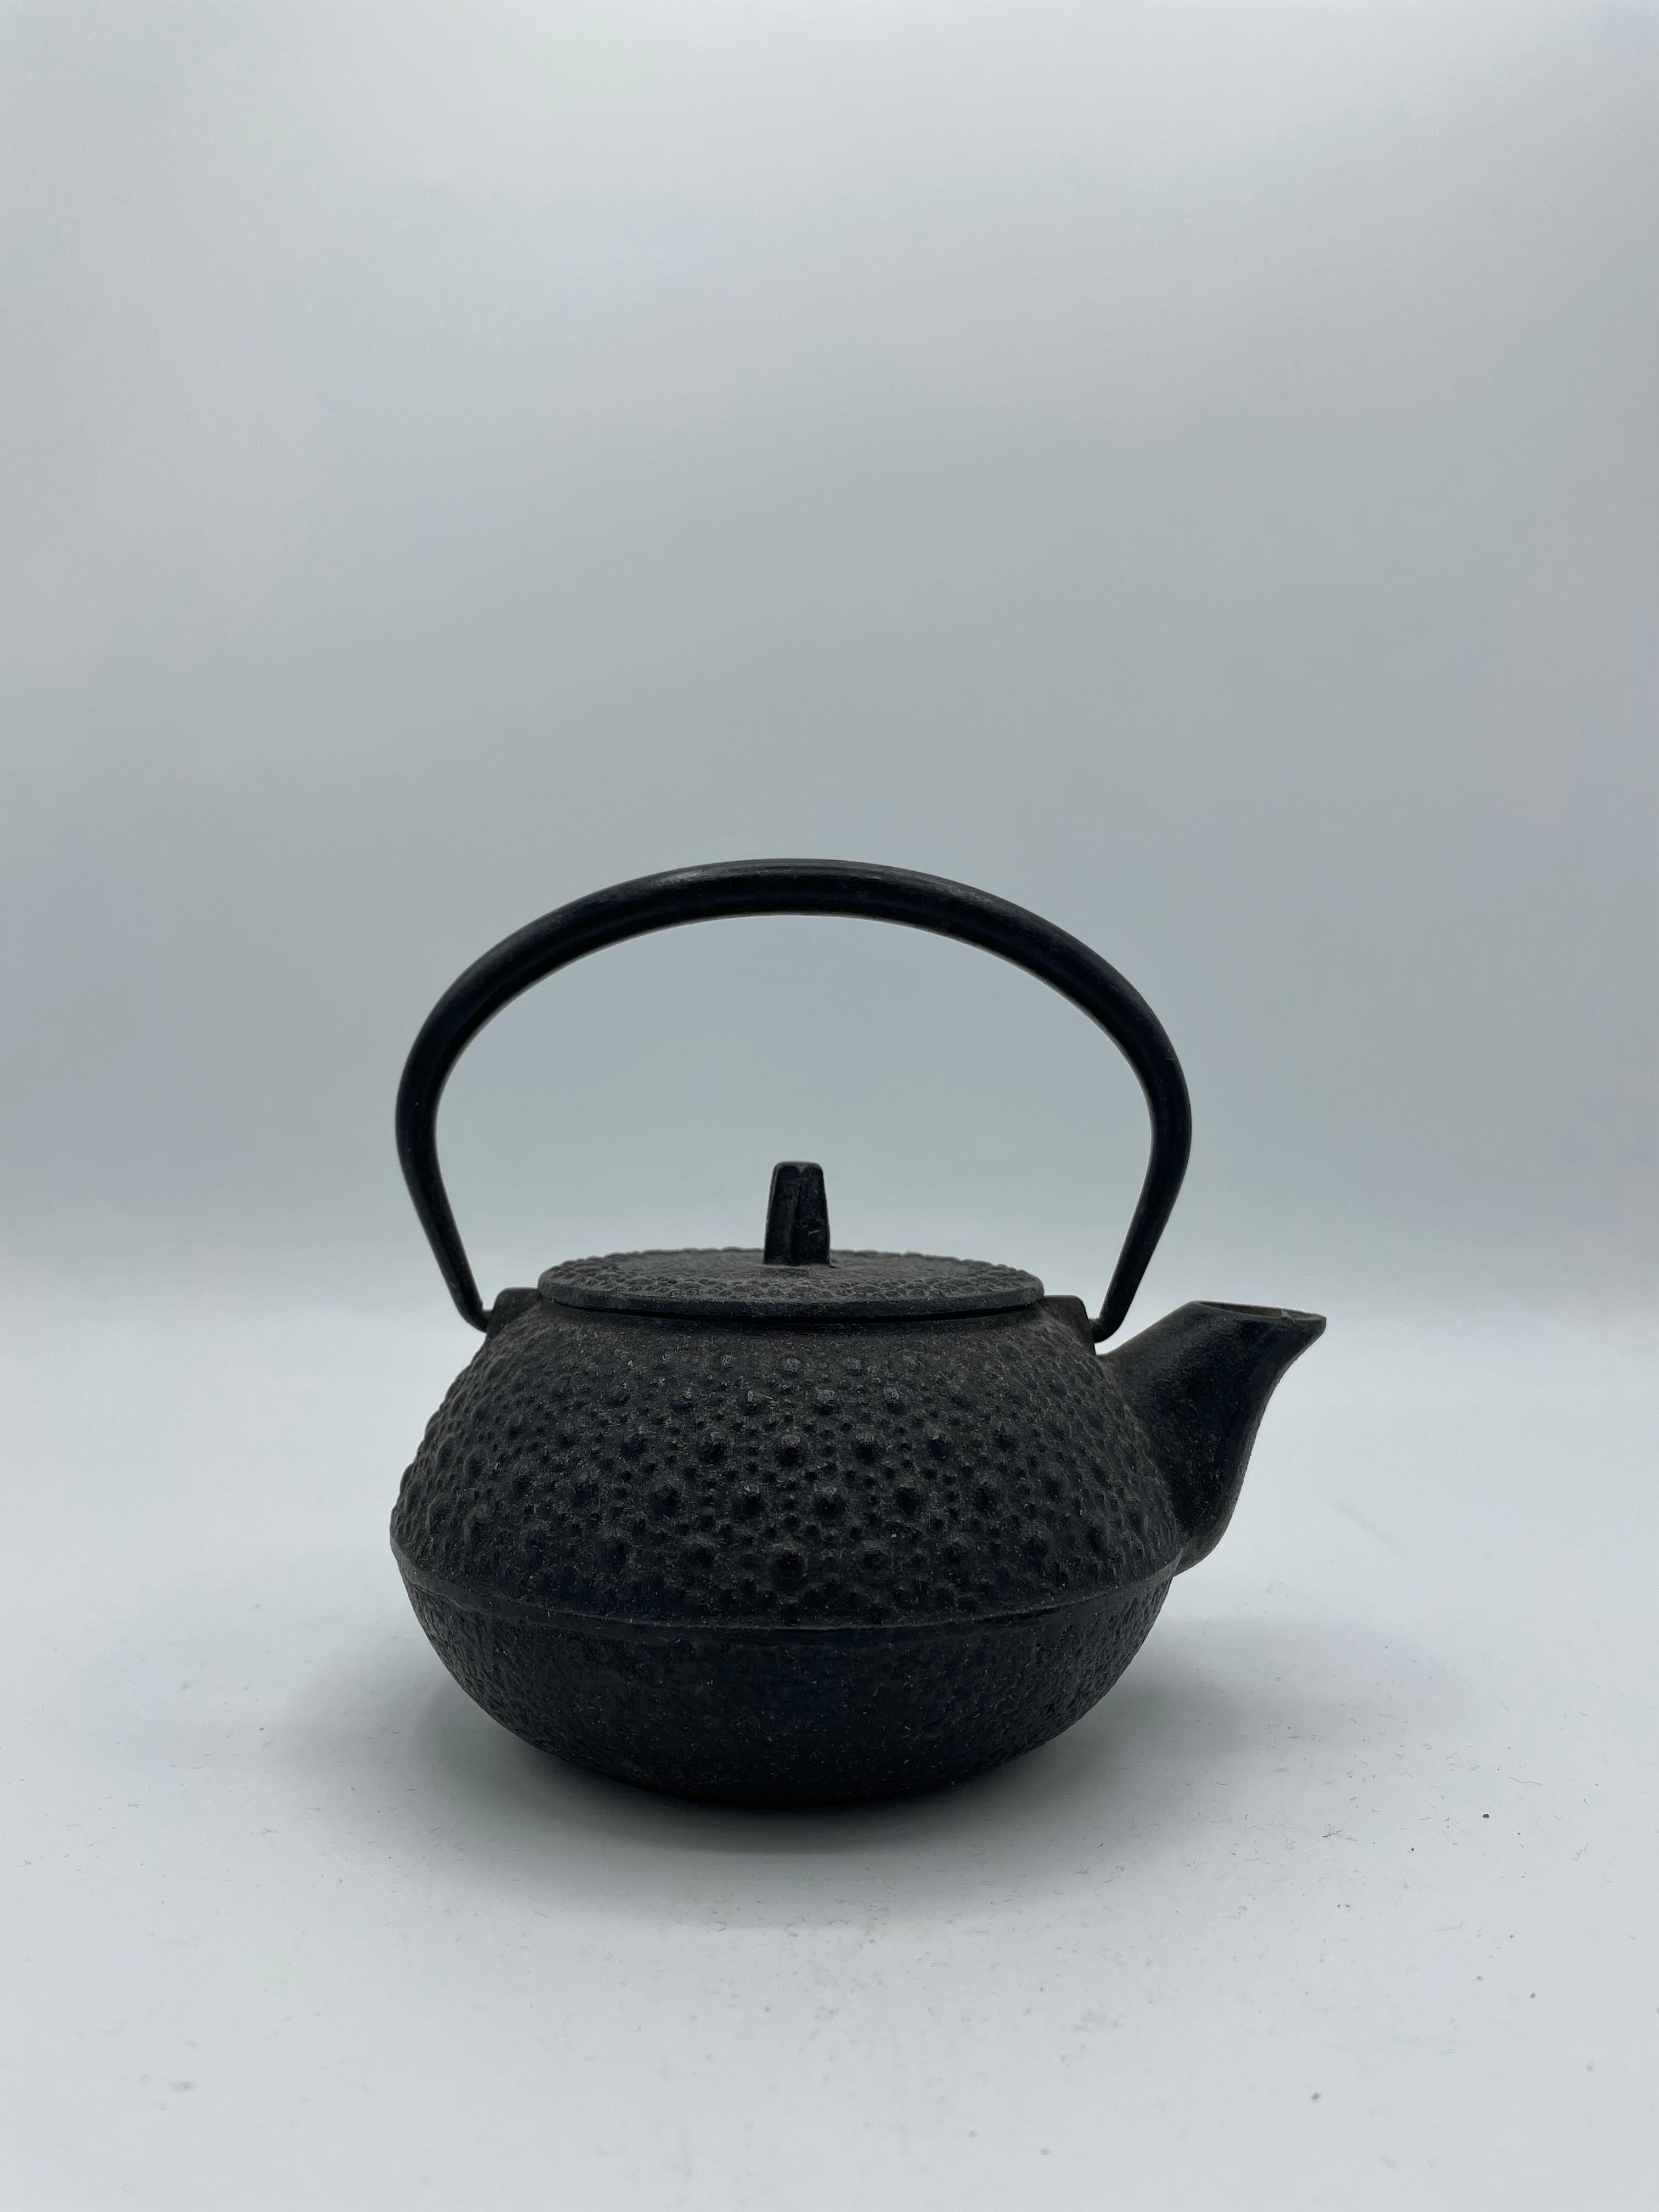 This kettle was made in 1980s, in Showa era. 
The cast iron kettles like this item are called 'Tetsubin' in Japan.
It can be put on the fire or an induction plate. Also we can use it as decoration.
Do not scratch the bottom of the kettle to leave